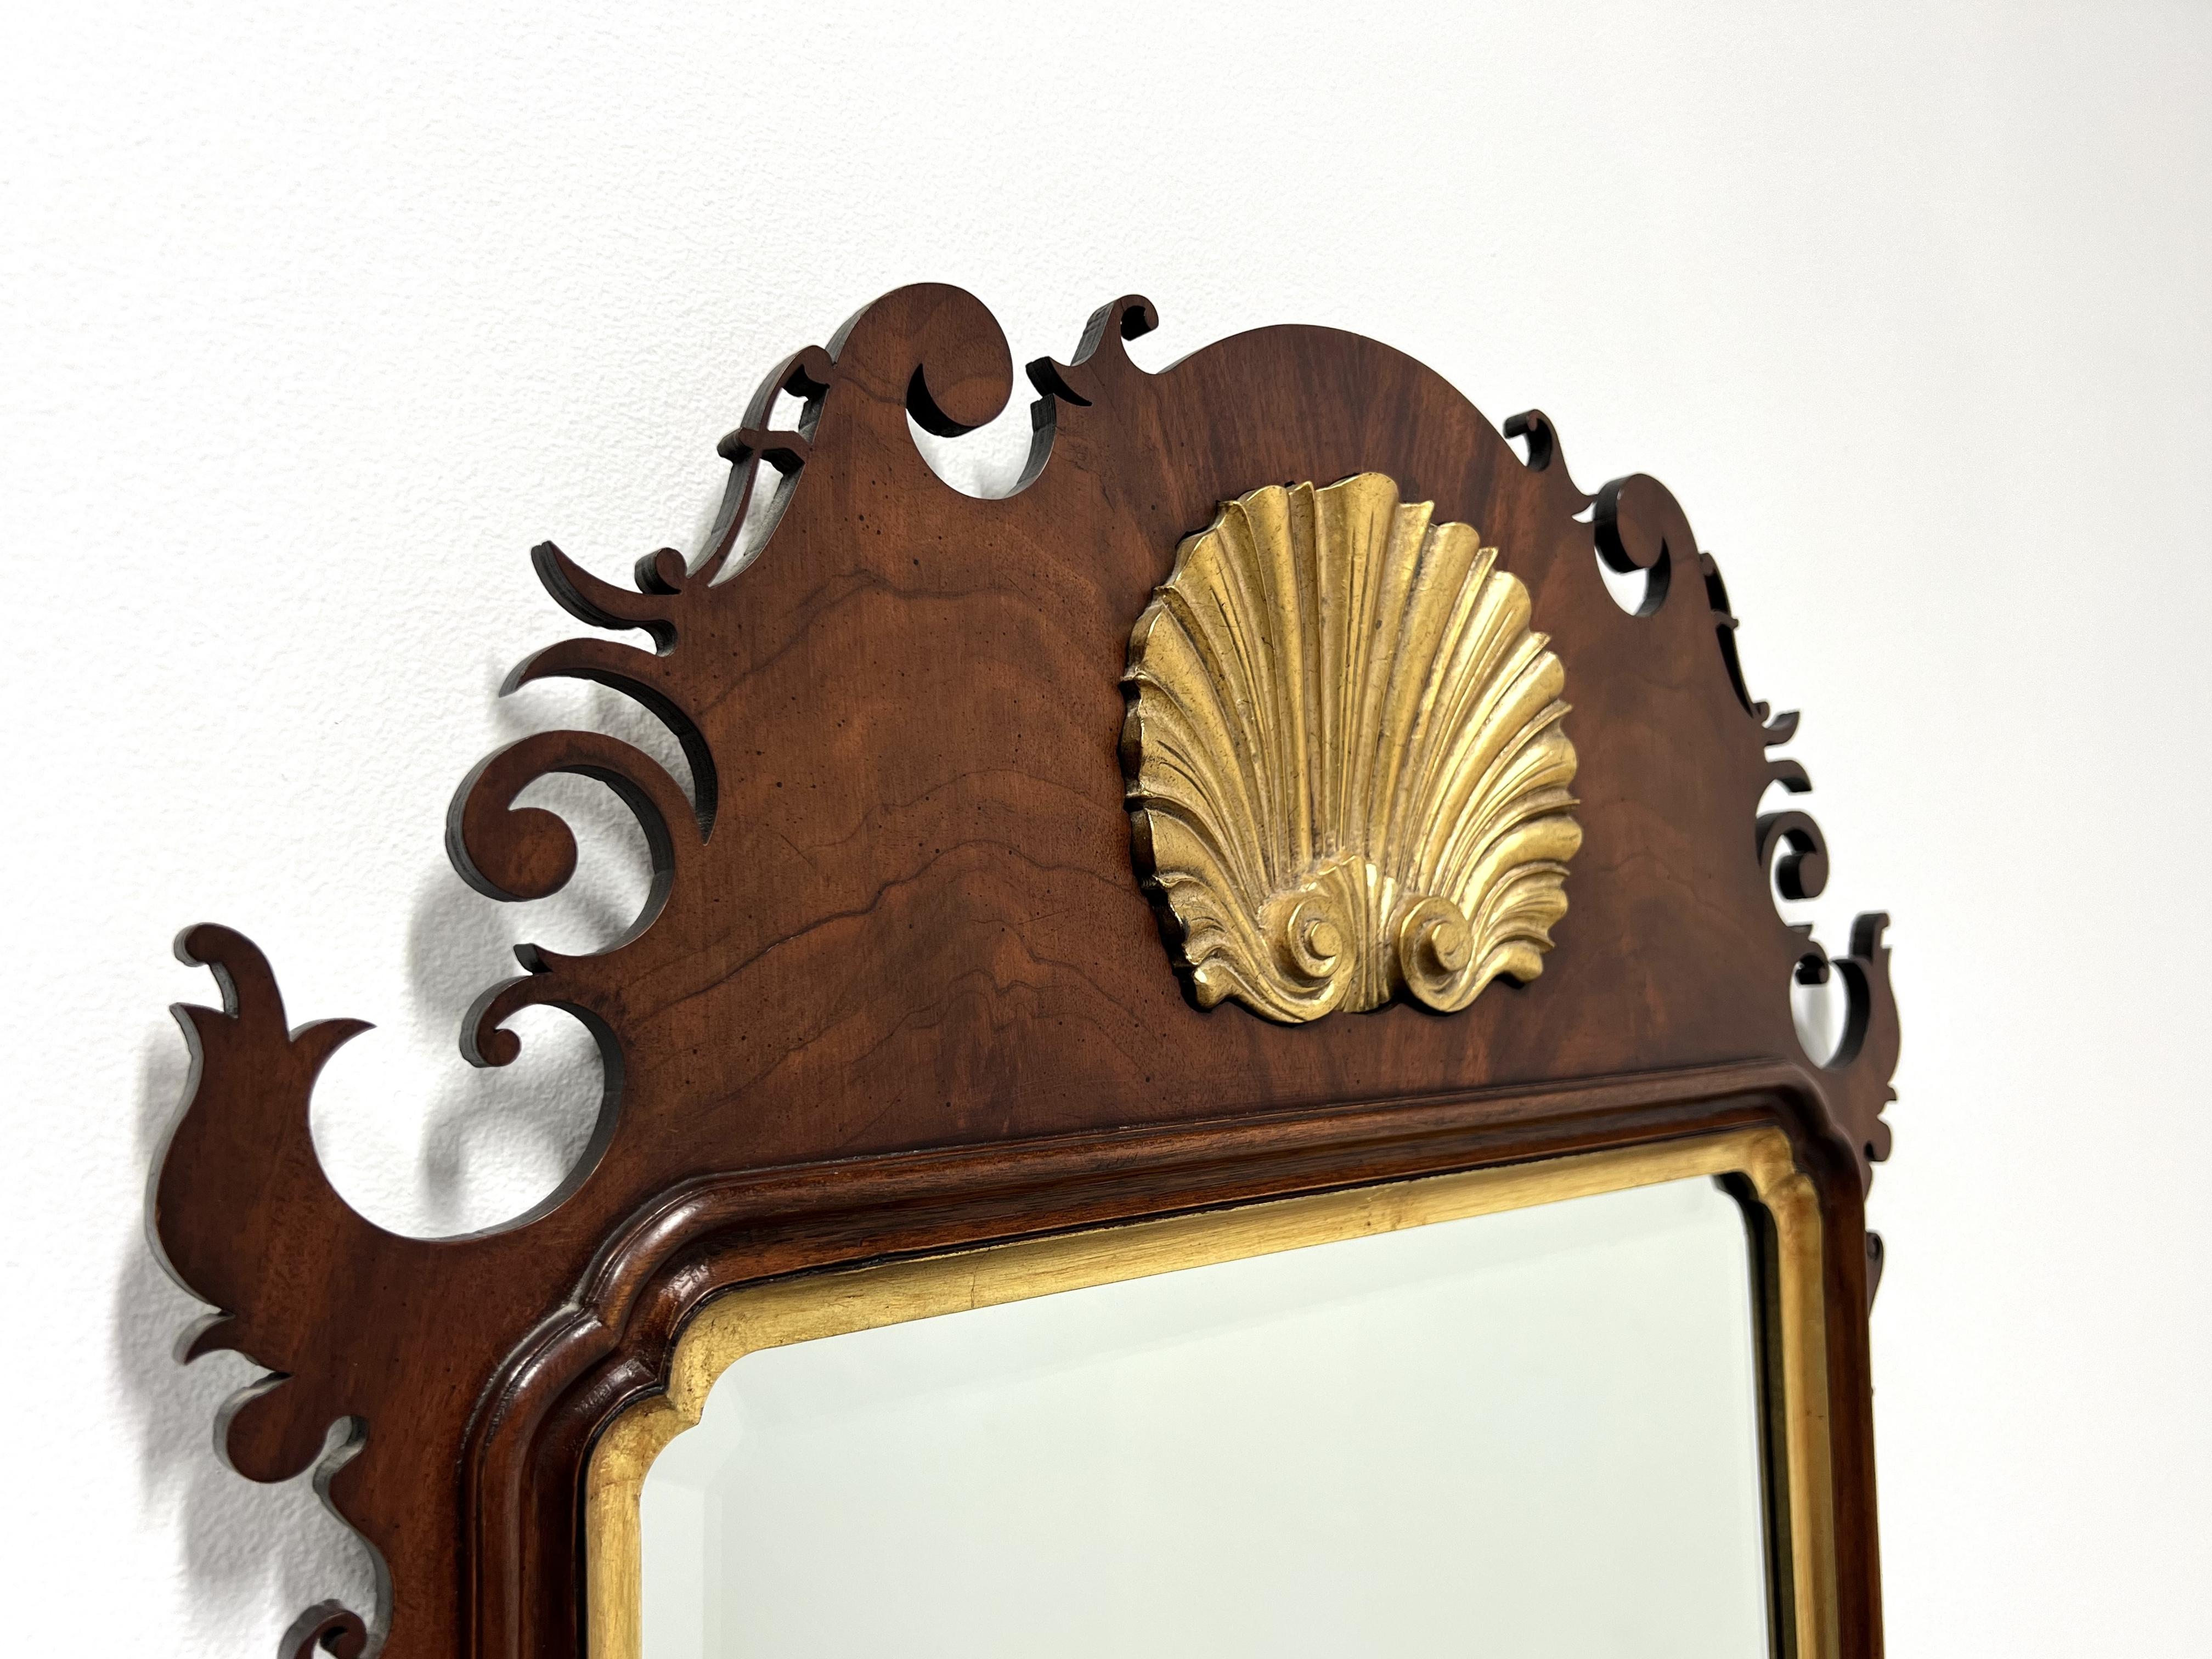 A Chippendale style wall mirror, unbranded, similar quality to Councill or Lexington. Bevel edge mirrored glass in a mahogany frame with gold trim and top center gold gilt shell shaped medallion. Made in the USA, in the late 20th Century.

Measures: